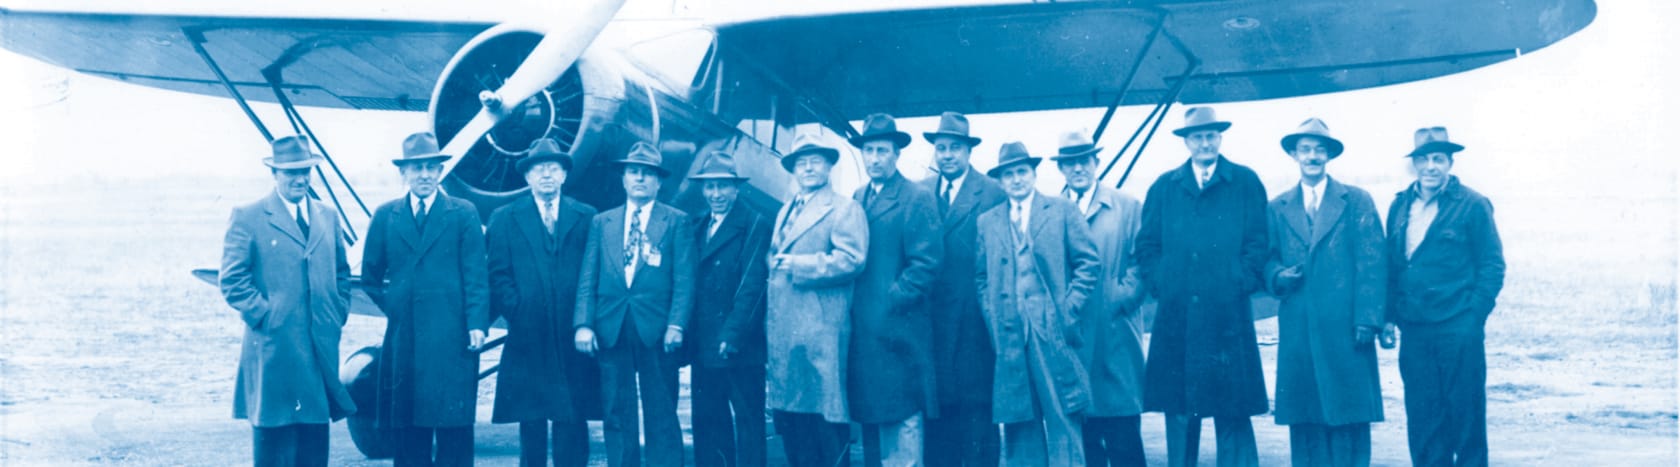 foth history - original team in front of airplane